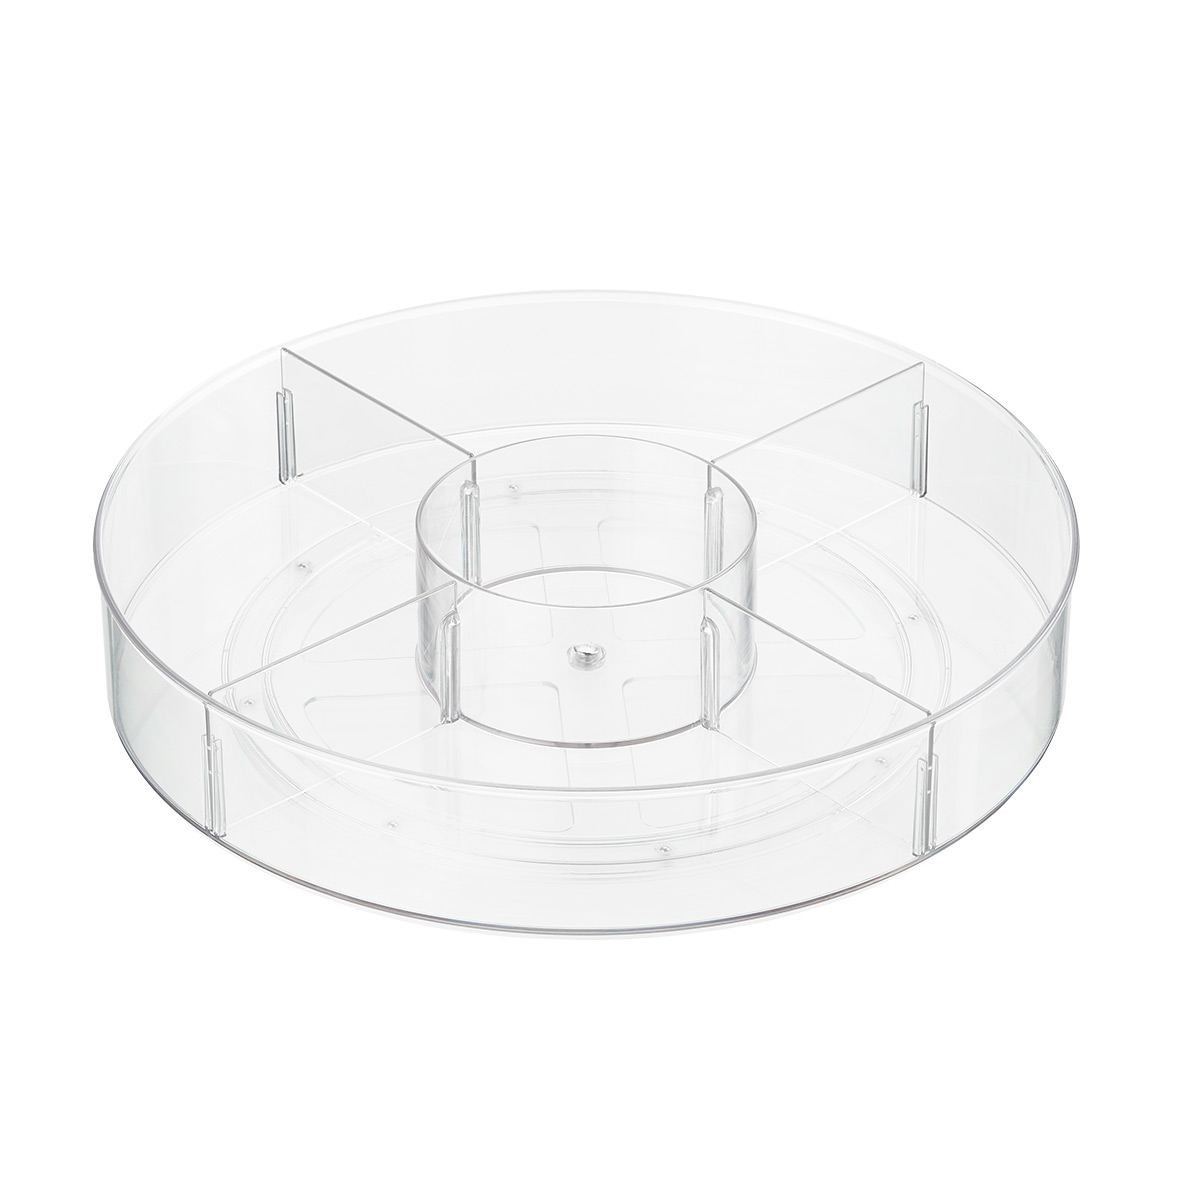 https://www.containerstore.com/catalogimages/386908/10079224-THE-large-turntable-v2.jpg